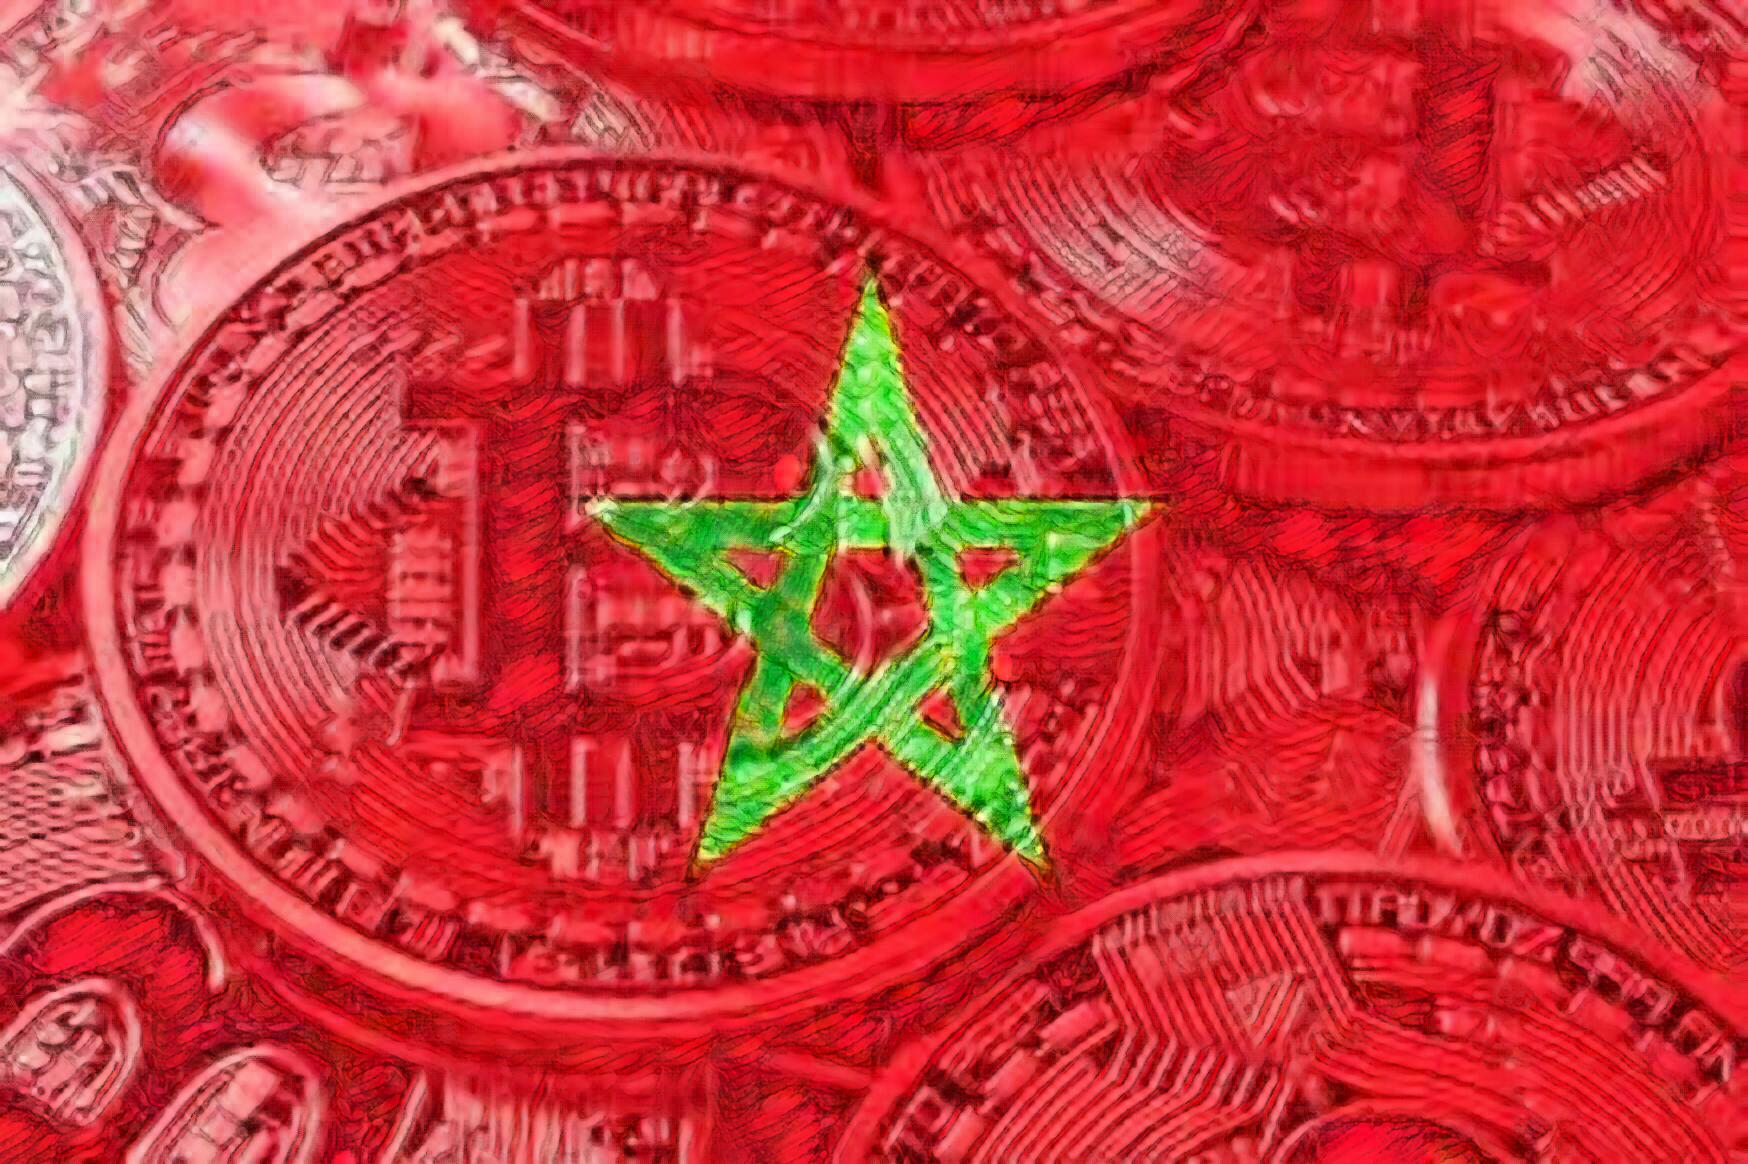 Morocco finalizes its regulatory framework on cryptocurrencies